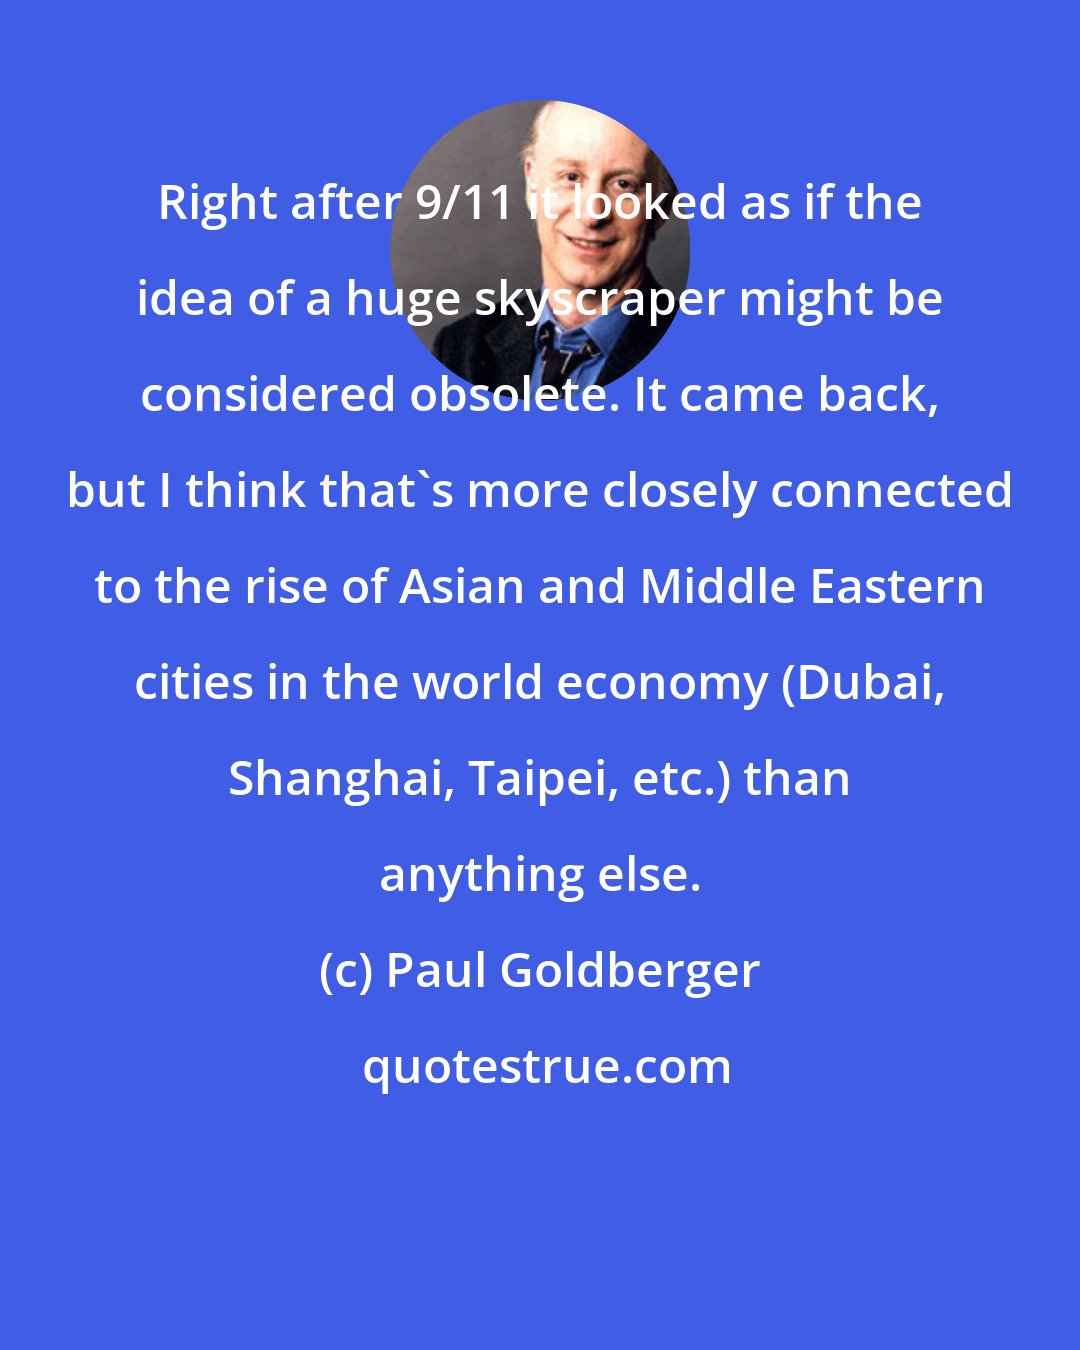 Paul Goldberger: Right after 9/11 it looked as if the idea of a huge skyscraper might be considered obsolete. It came back, but I think that's more closely connected to the rise of Asian and Middle Eastern cities in the world economy (Dubai, Shanghai, Taipei, etc.) than anything else.